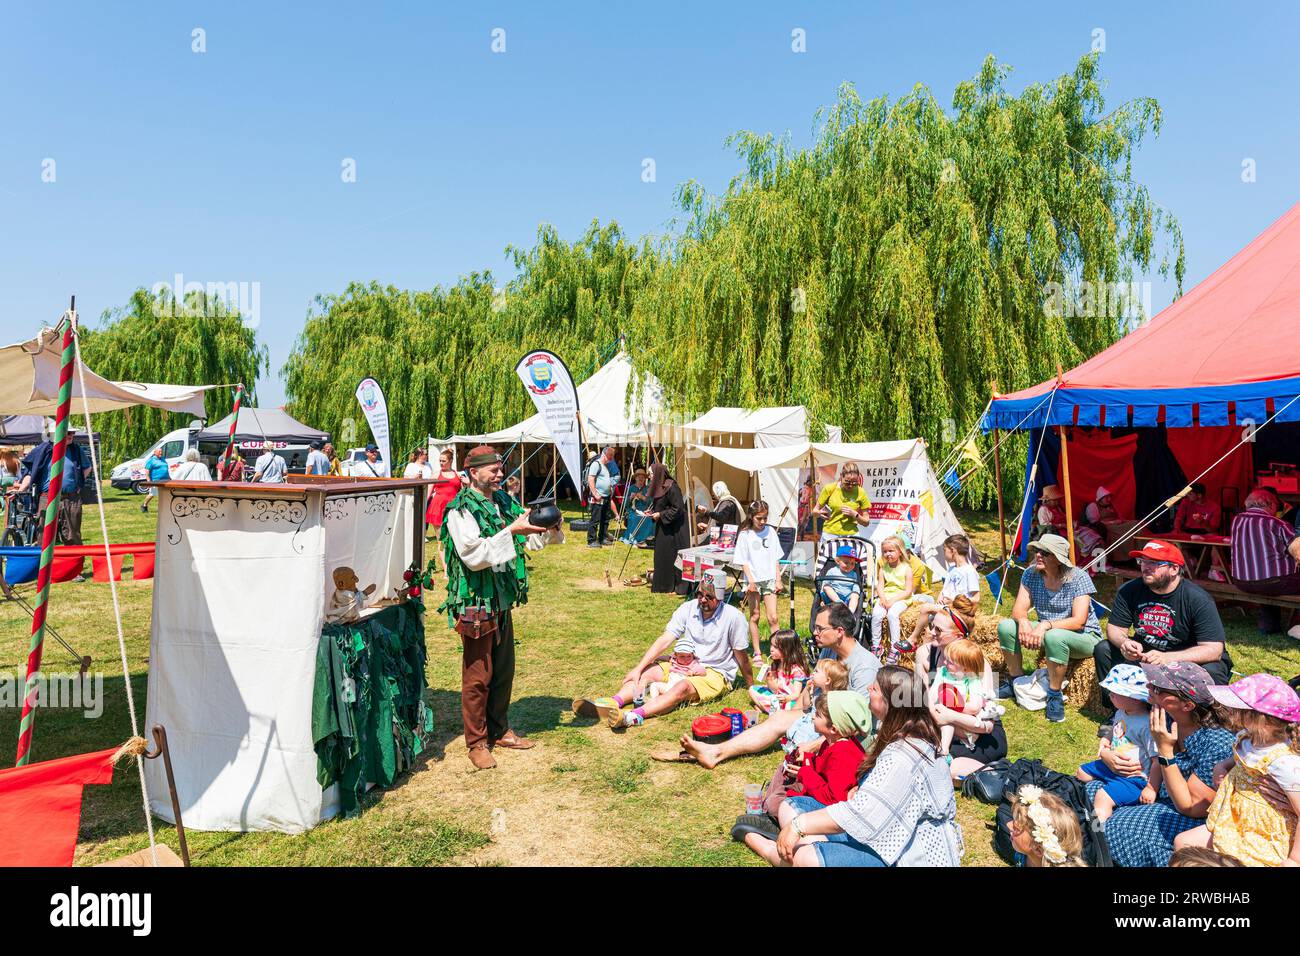 Medieval puppeteer in a green period costume, performing in front of a mainly seated audience on the grass on a hot summer day in bright sunshine. Stock Photo